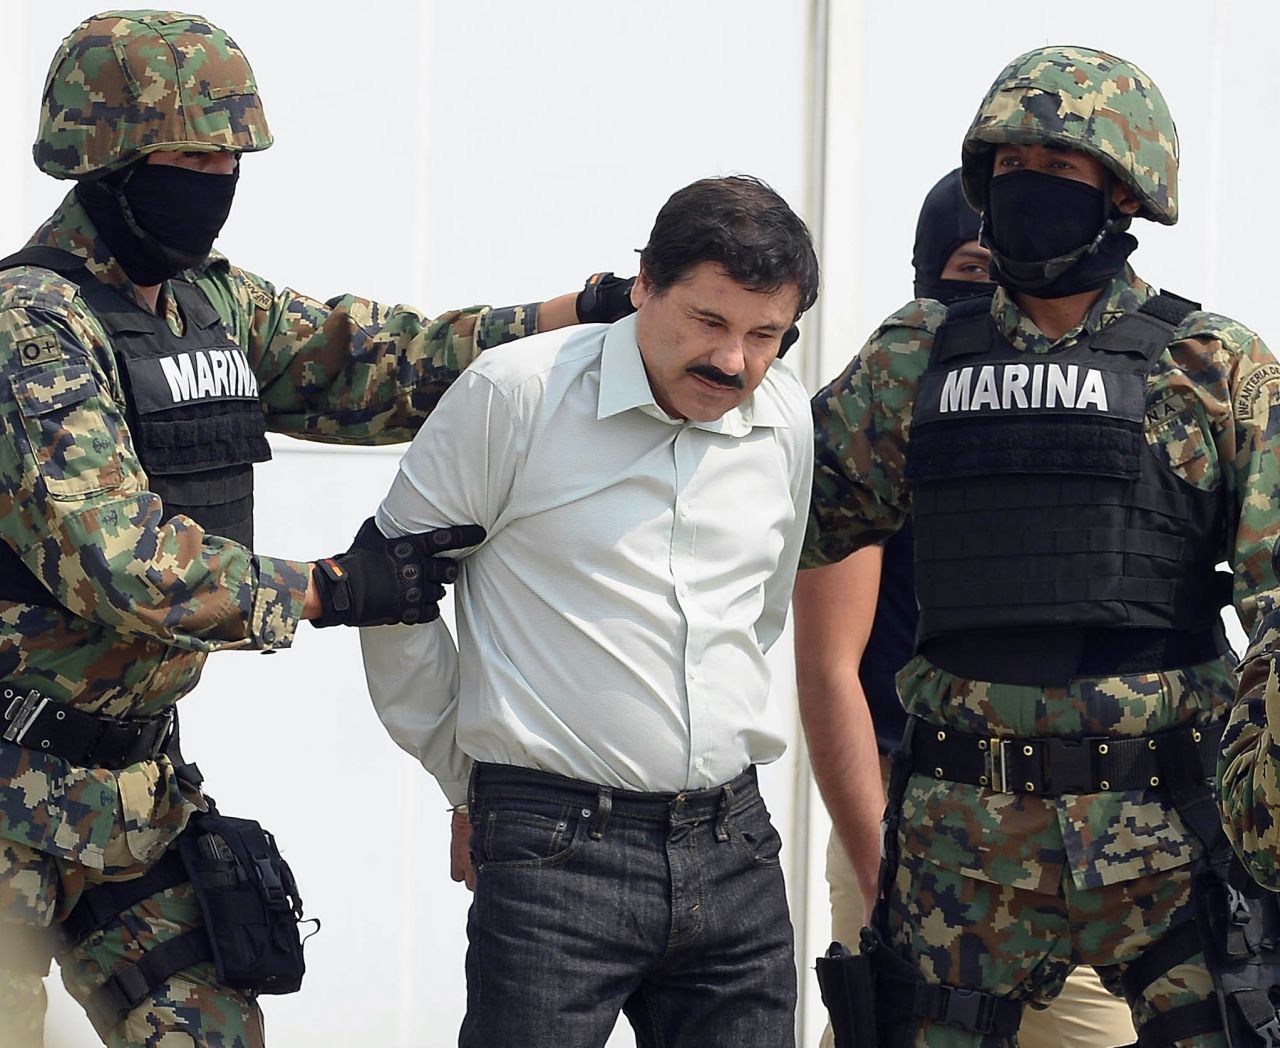 Mexican drug trafficker Joaquin "El Chapo" Guzman is escorted by Mexican marines as he is presented to the press on February 22, in Mexico City. 